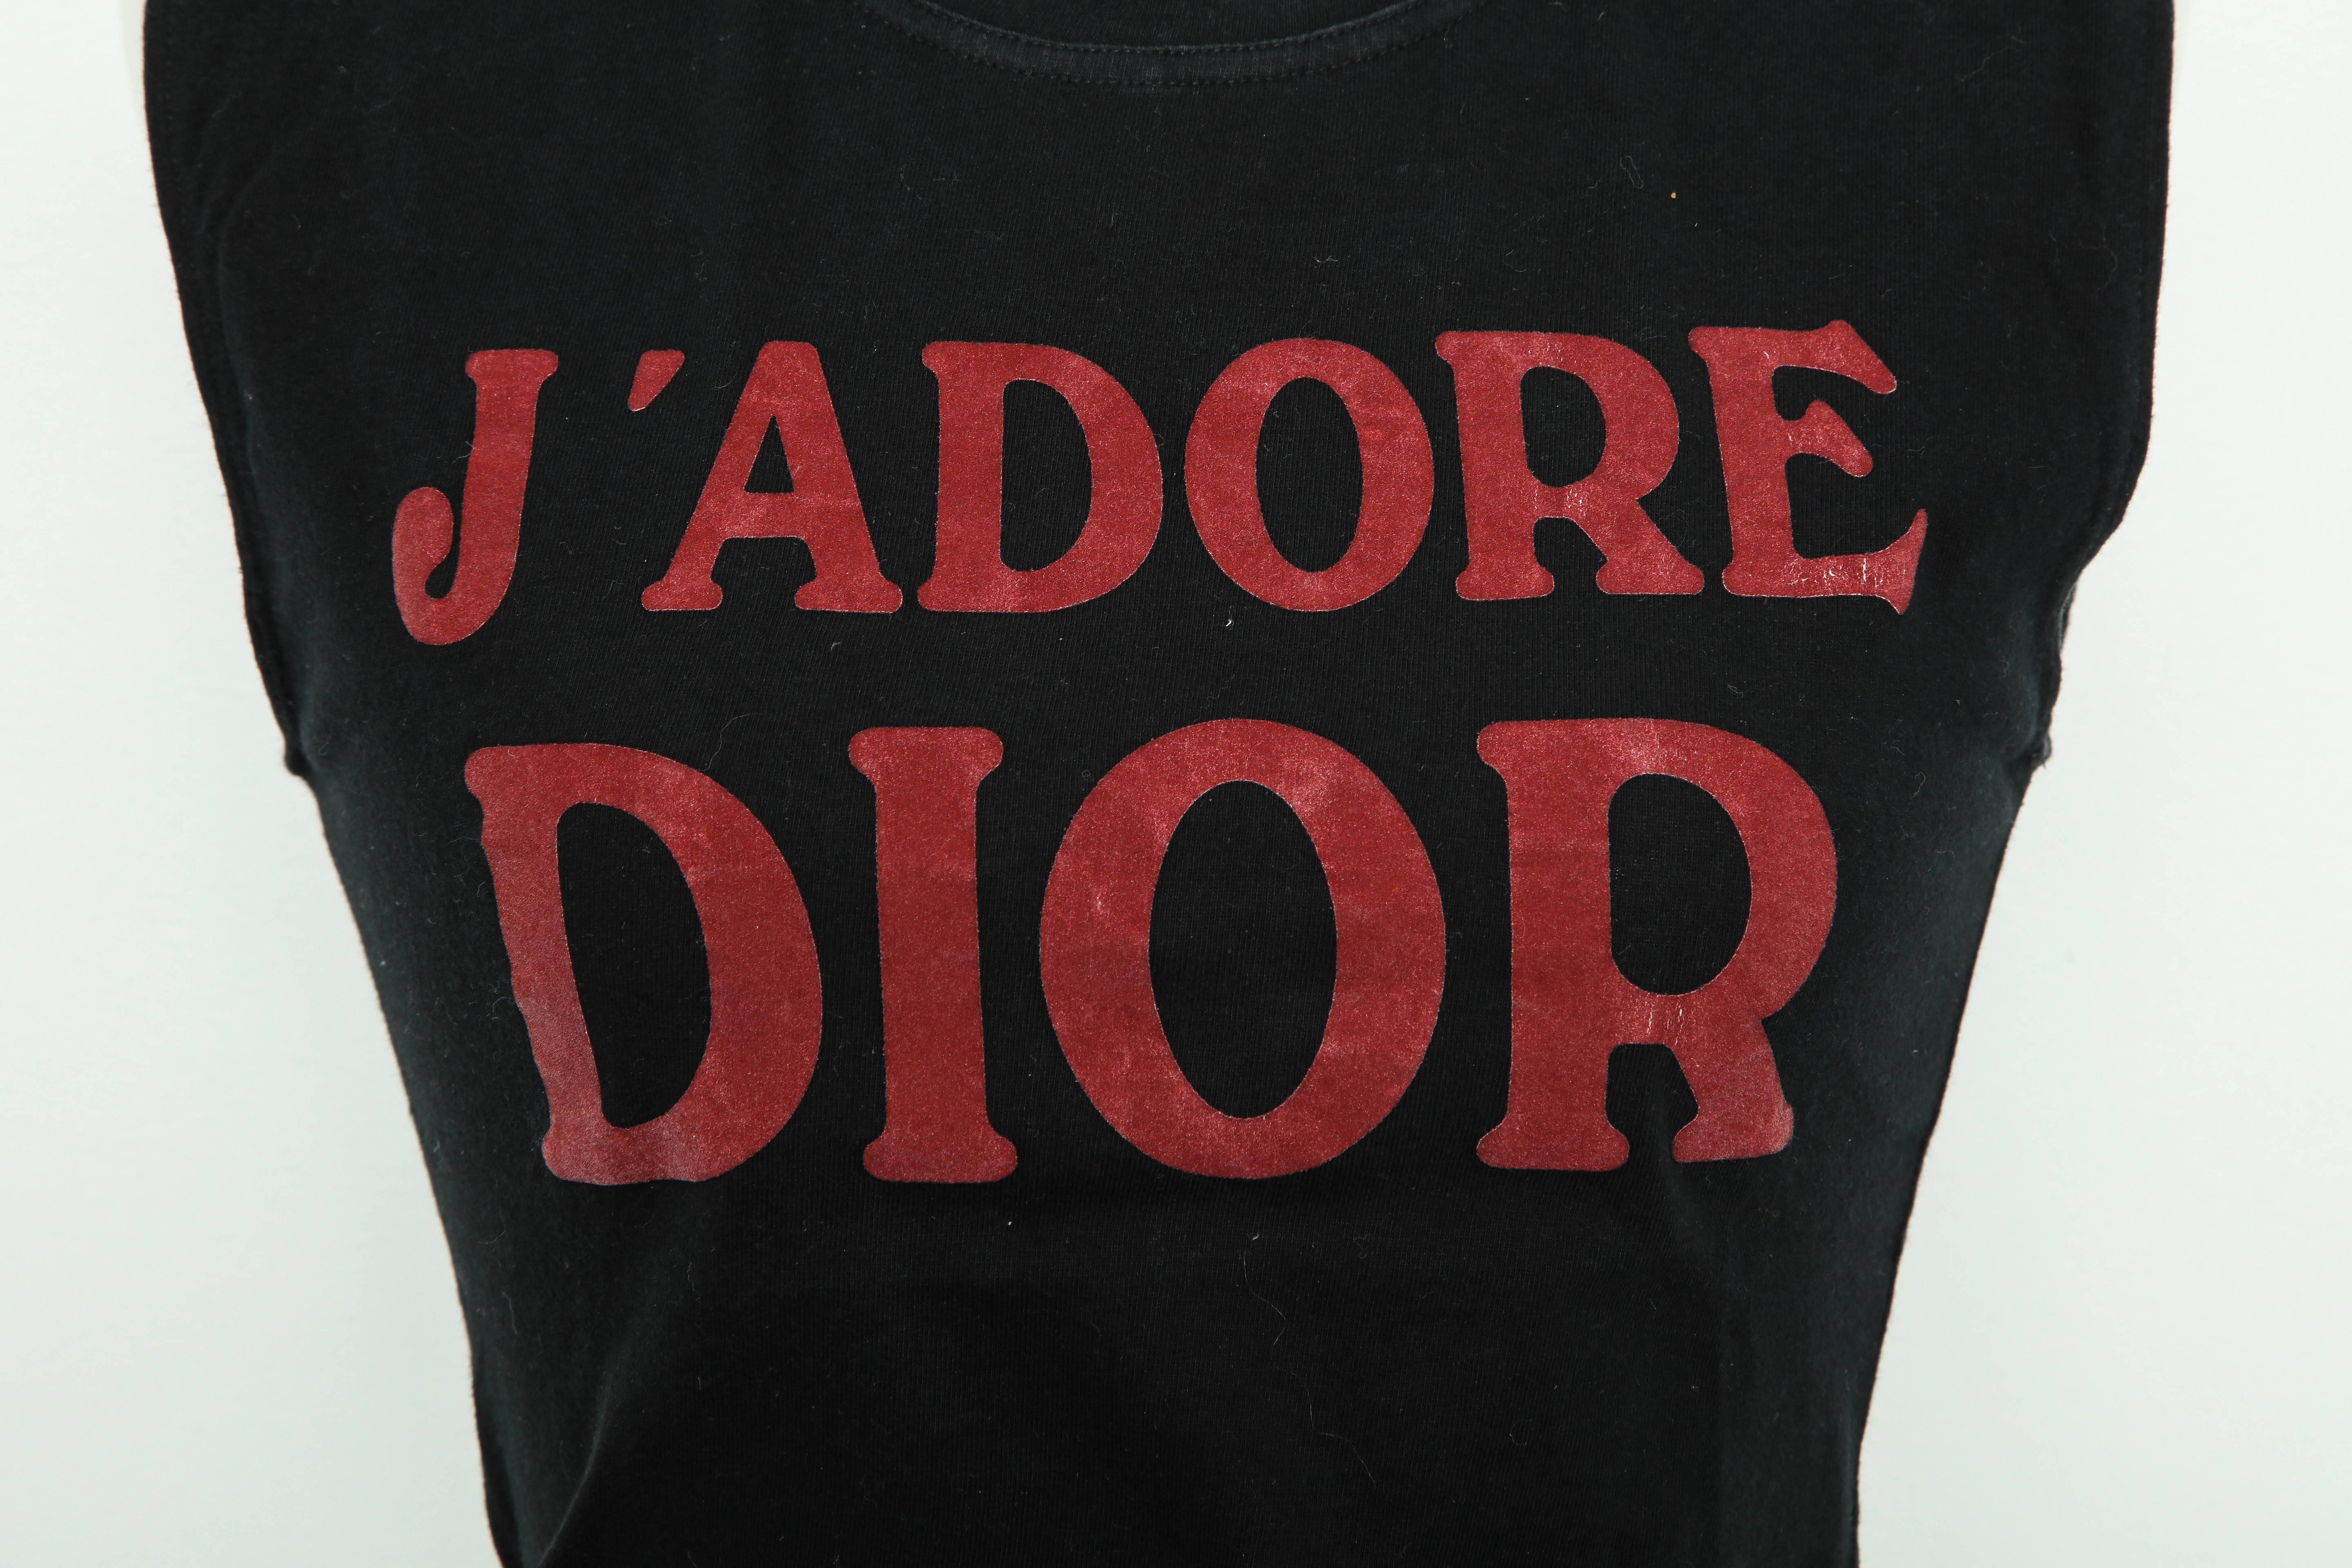 Christian Dior by John Galliano tank top with iconic "J'Adore Dior" logo.
French size 36